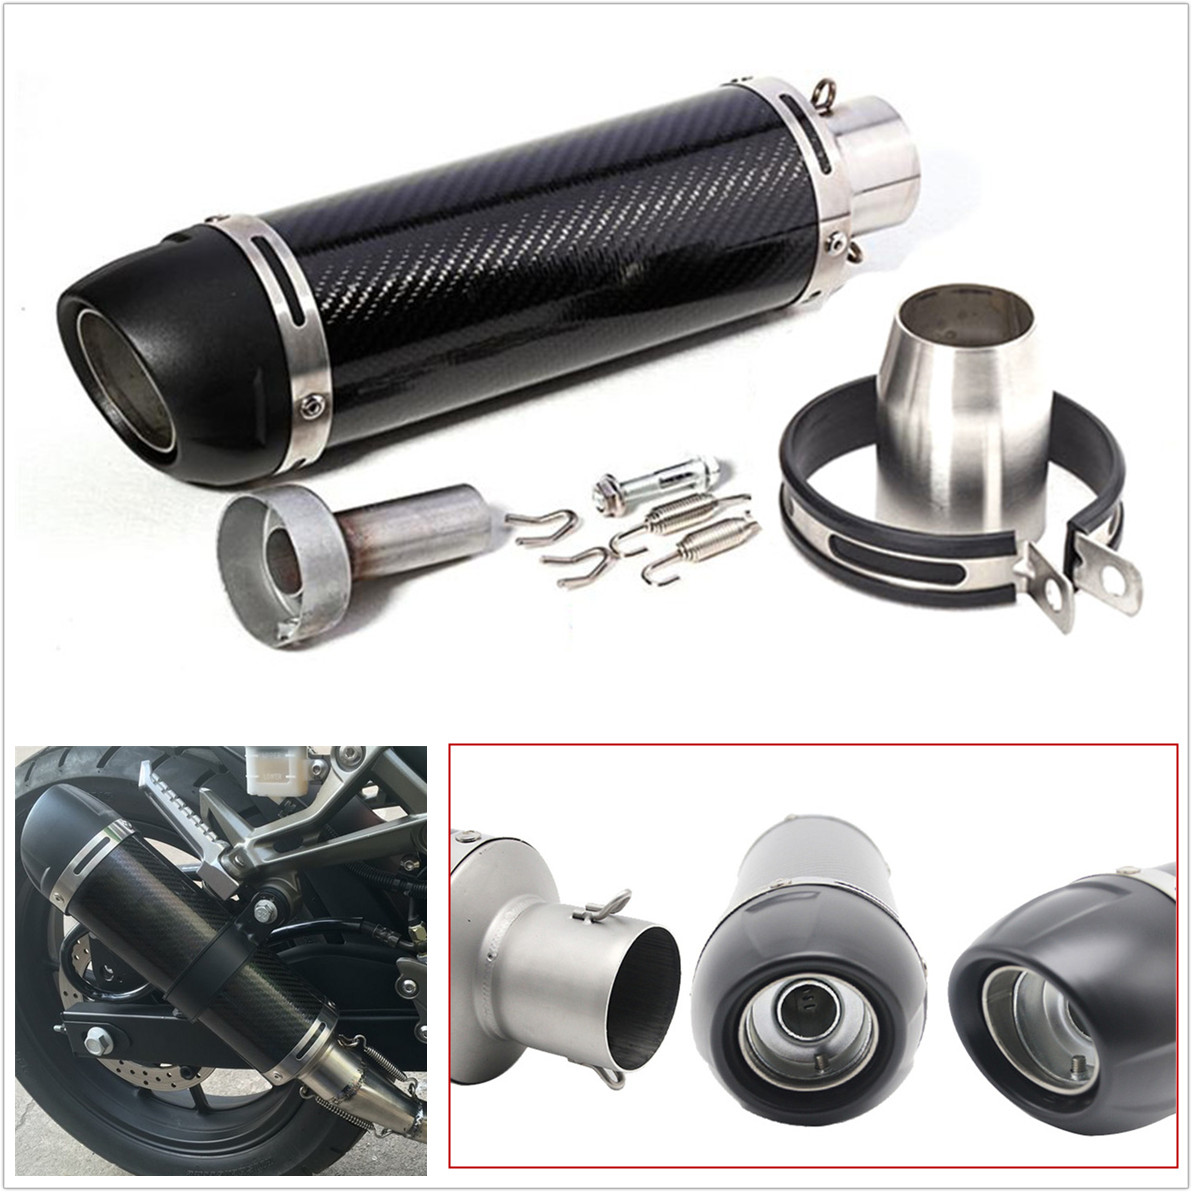 1PCS 51mm 245mm Real Carbon Fiber Slip-On Exhaust Muffler Pipe With DB Killer